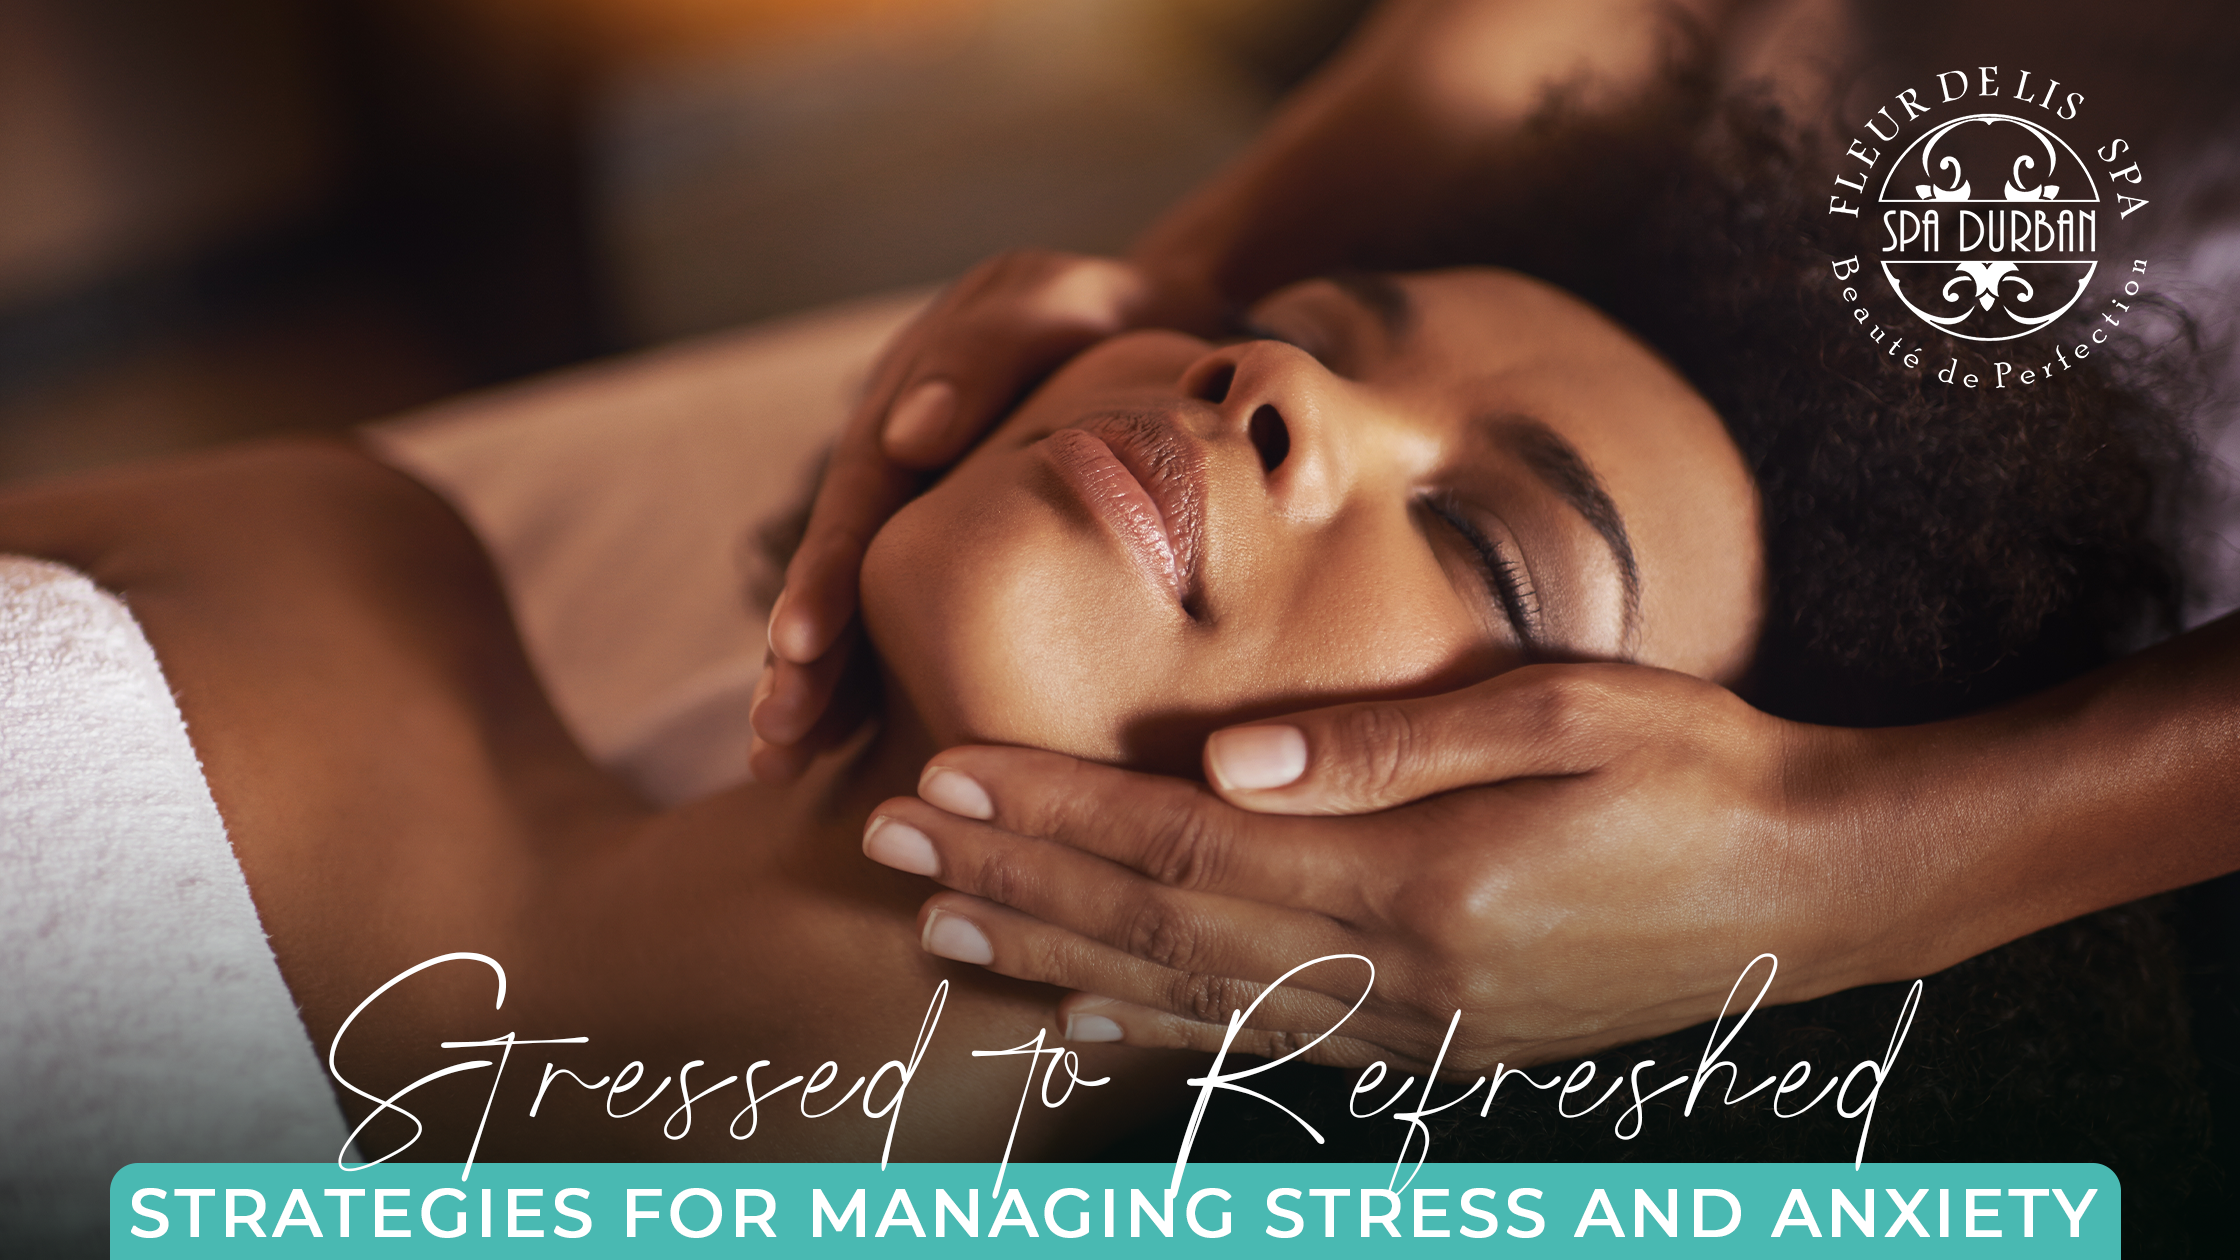 From Stressed to Refreshed: Strategies for Managing Stress and Anxiety